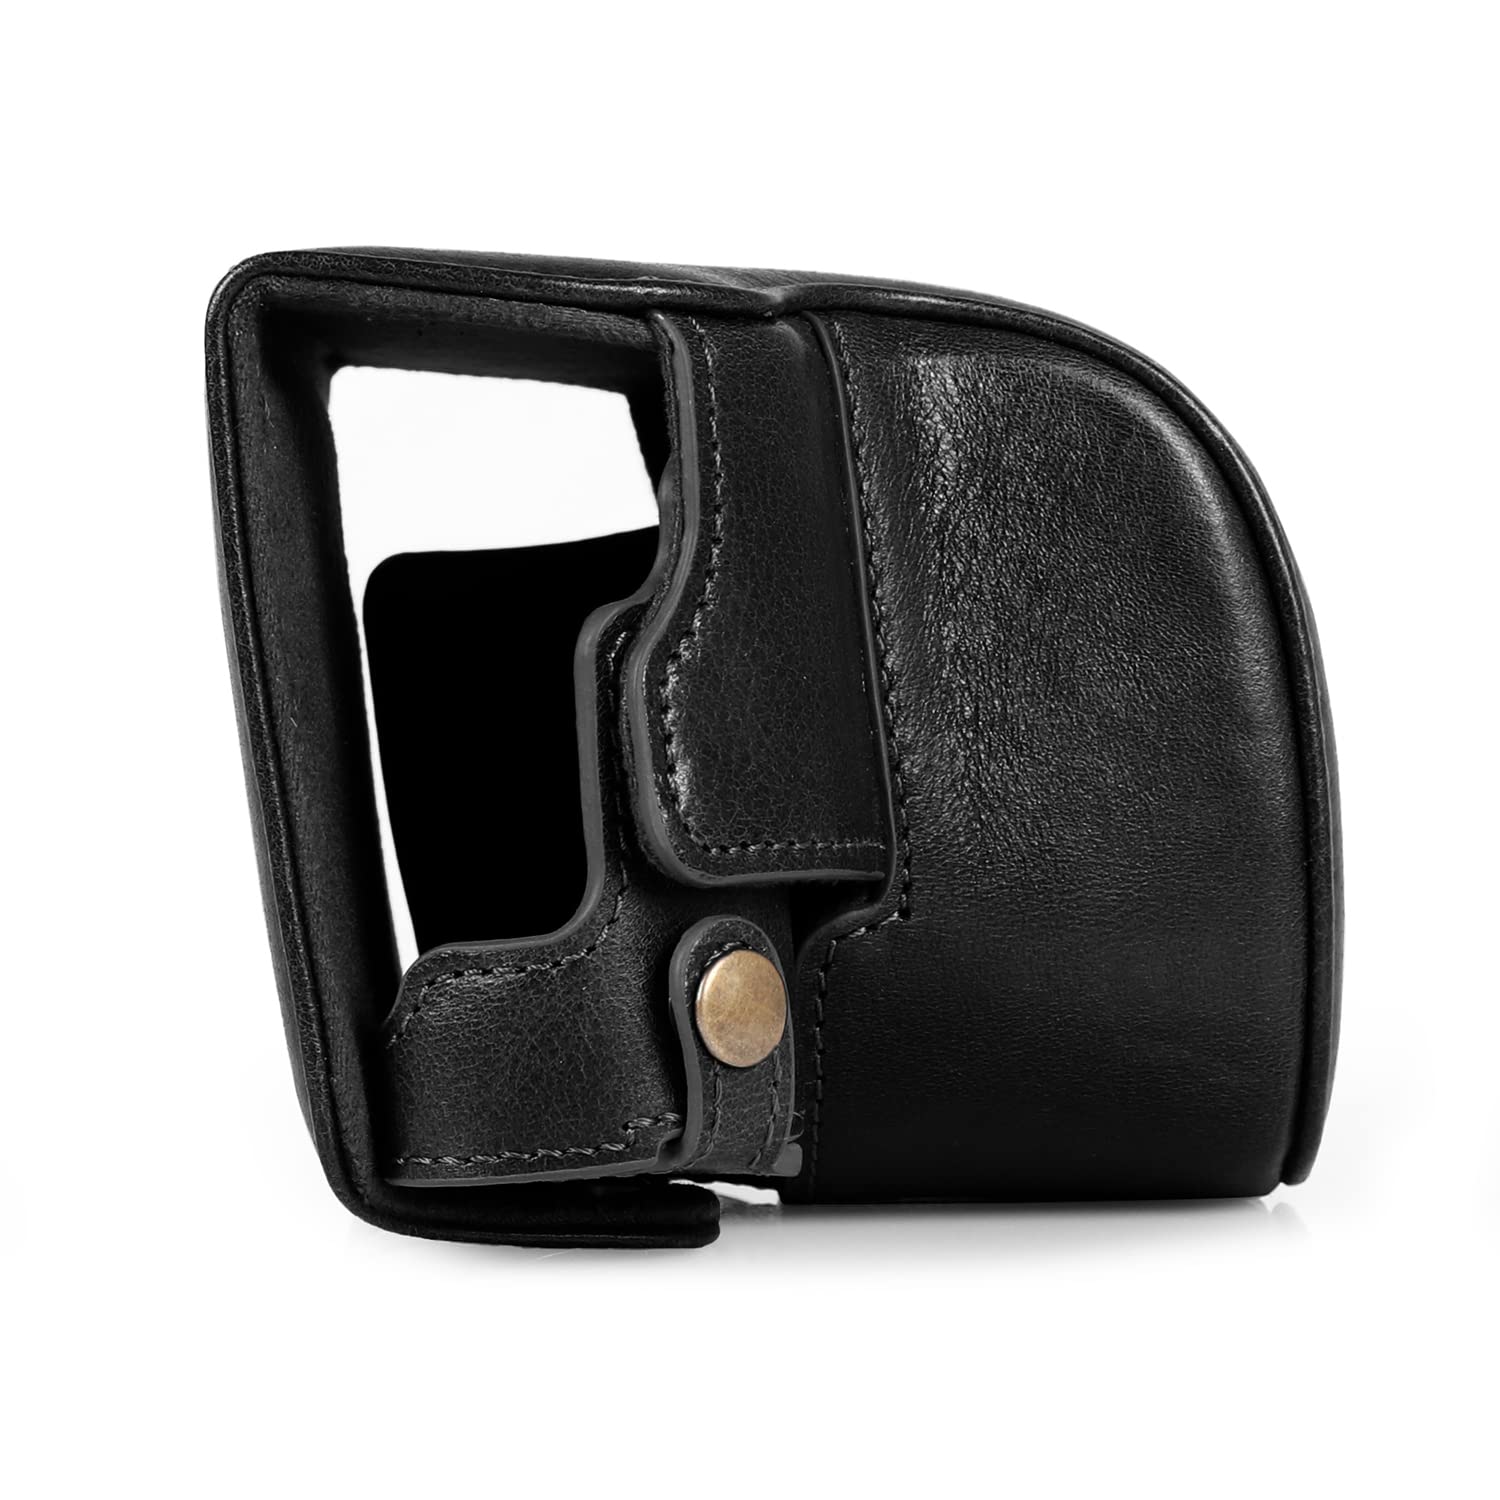 Mega Gear MG1605 Ever Ready Genuine Leather Camera Case Compatible with Leica D-Lux 7 - Black